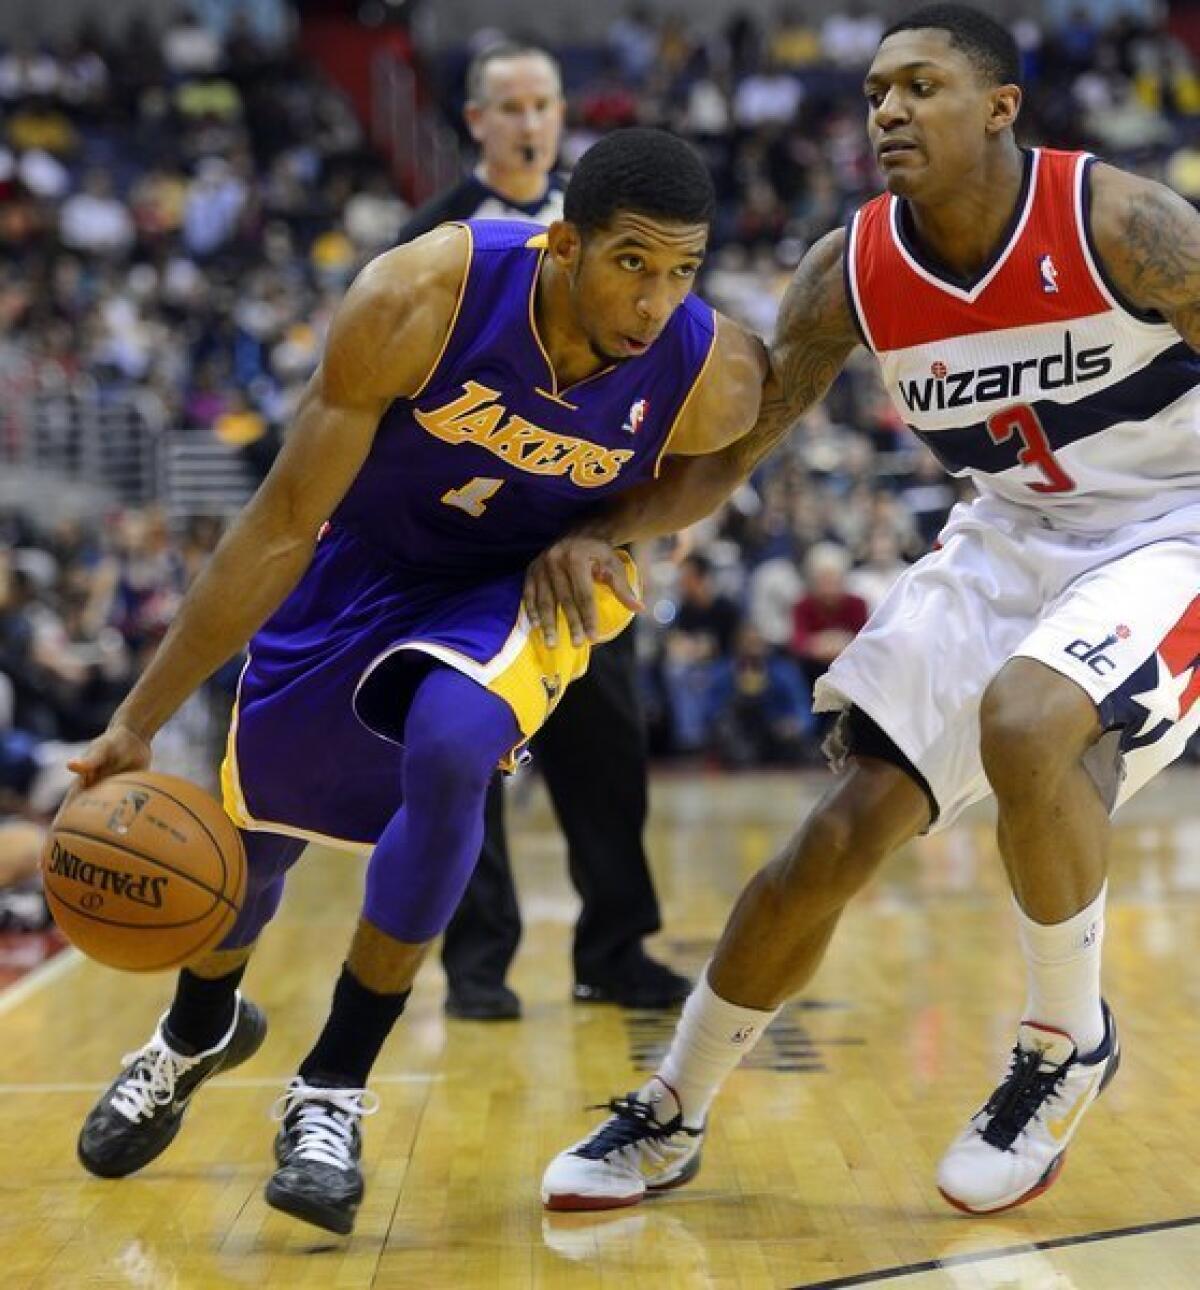 The Lakers' Darius Morris drives against Washington guard Bradley Beal in the first half on Dec. 14, 2012, at the Verizon Center.